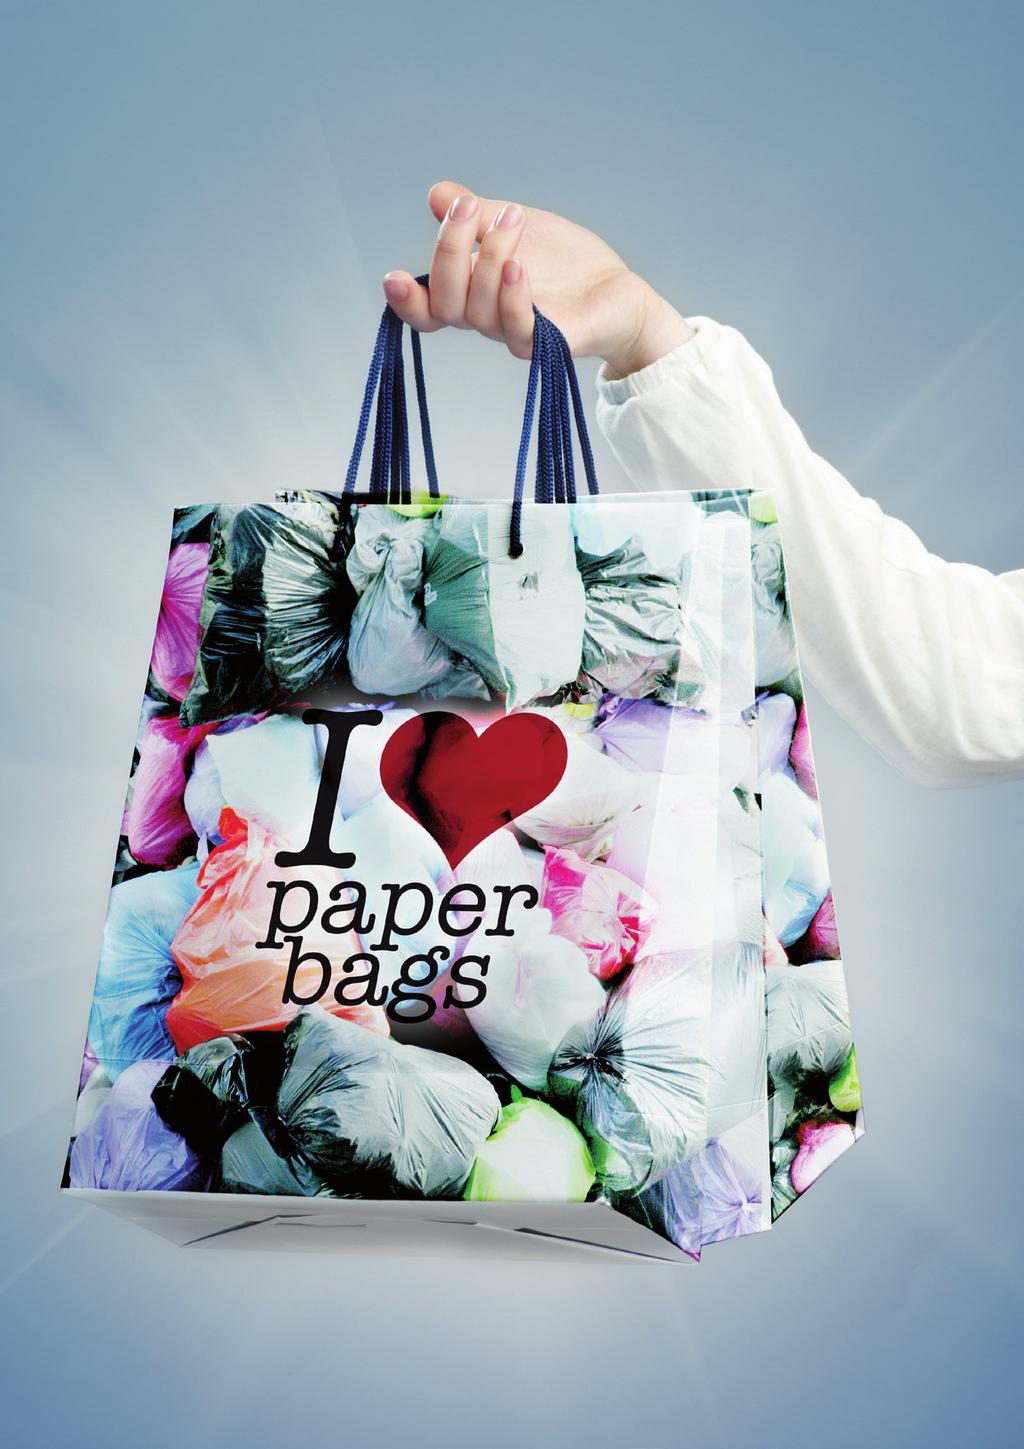 CONSUMERS PREFER PAPER Consumers love paper it is perceived as more luxurious and better for the environment than the